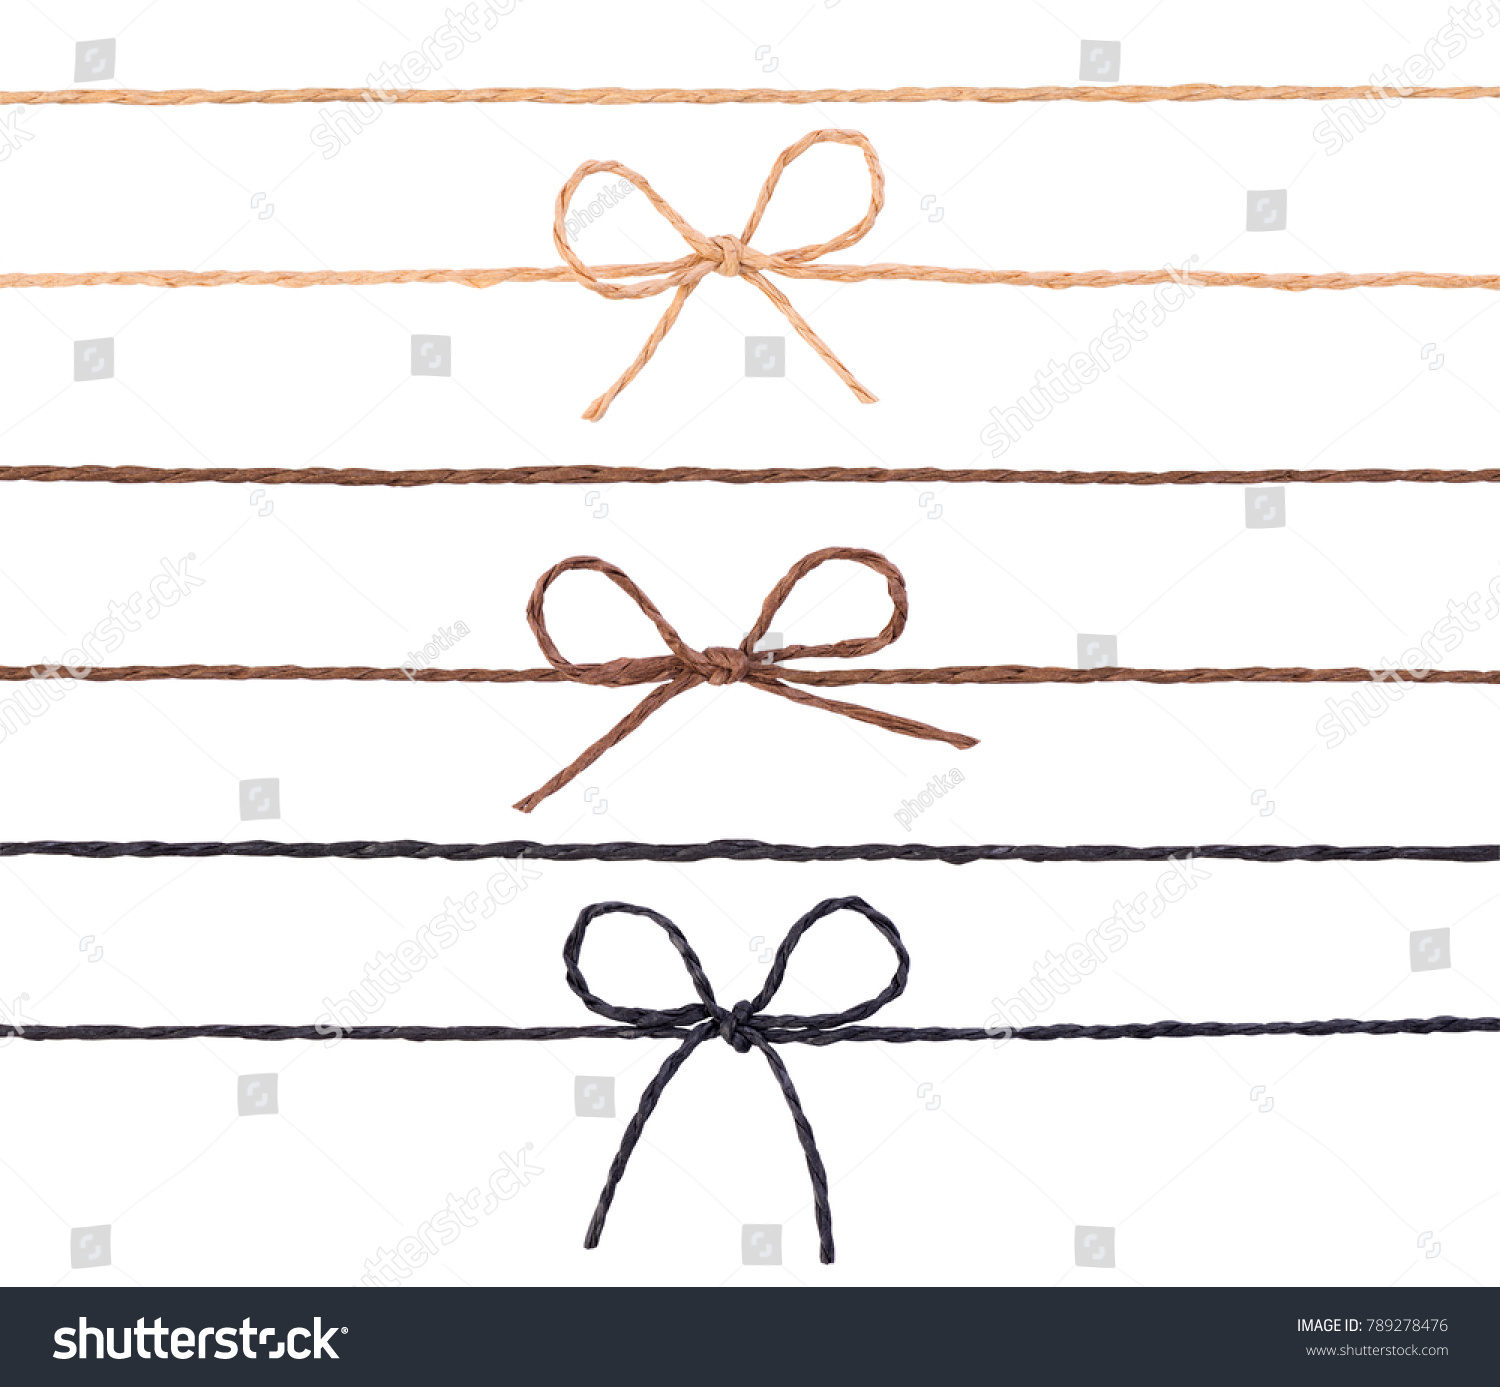 Strings with bows isolated on white background #789278476